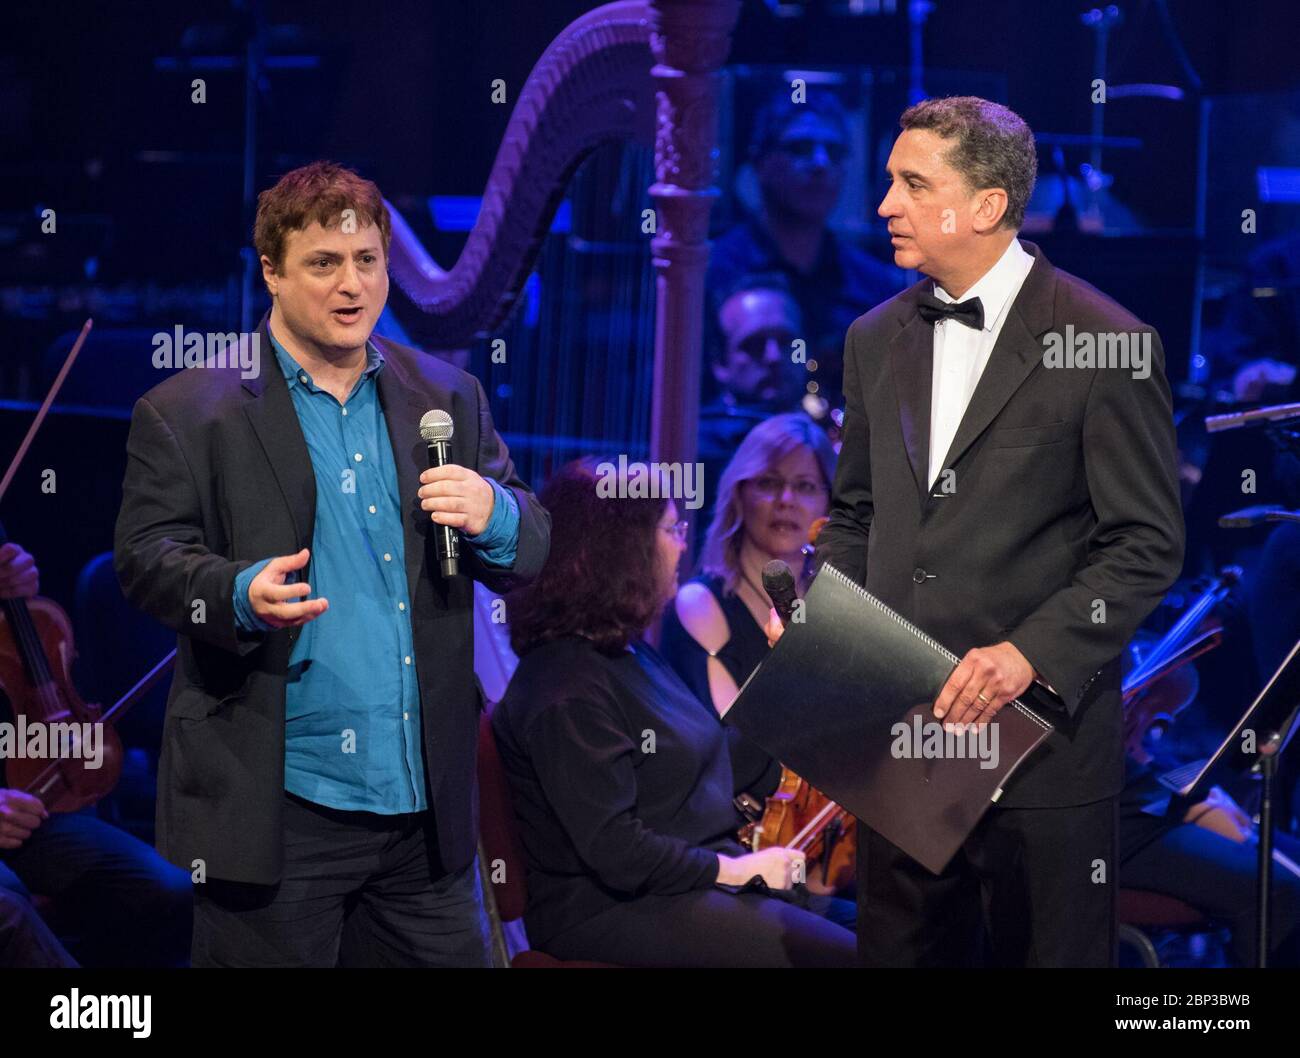 NASA Celebrates 60th Anniversary with National Symphony Orchestra  Carl Sagan's son, Nick Sagan, left, speaks at the &quot;National Symphony Orchestra Pops: Space, the Next Frontier&quot; event celebrating NASA's 60th Anniversary, Friday, June 1, 2018 at the John F. Kennedy Center for the Performing Arts in Washington. The event featured music inspired by space including artists Will.i.am, Grace Potter, Coheed &amp; Cambria, John Cho, and guest Nick Sagan. Stock Photo